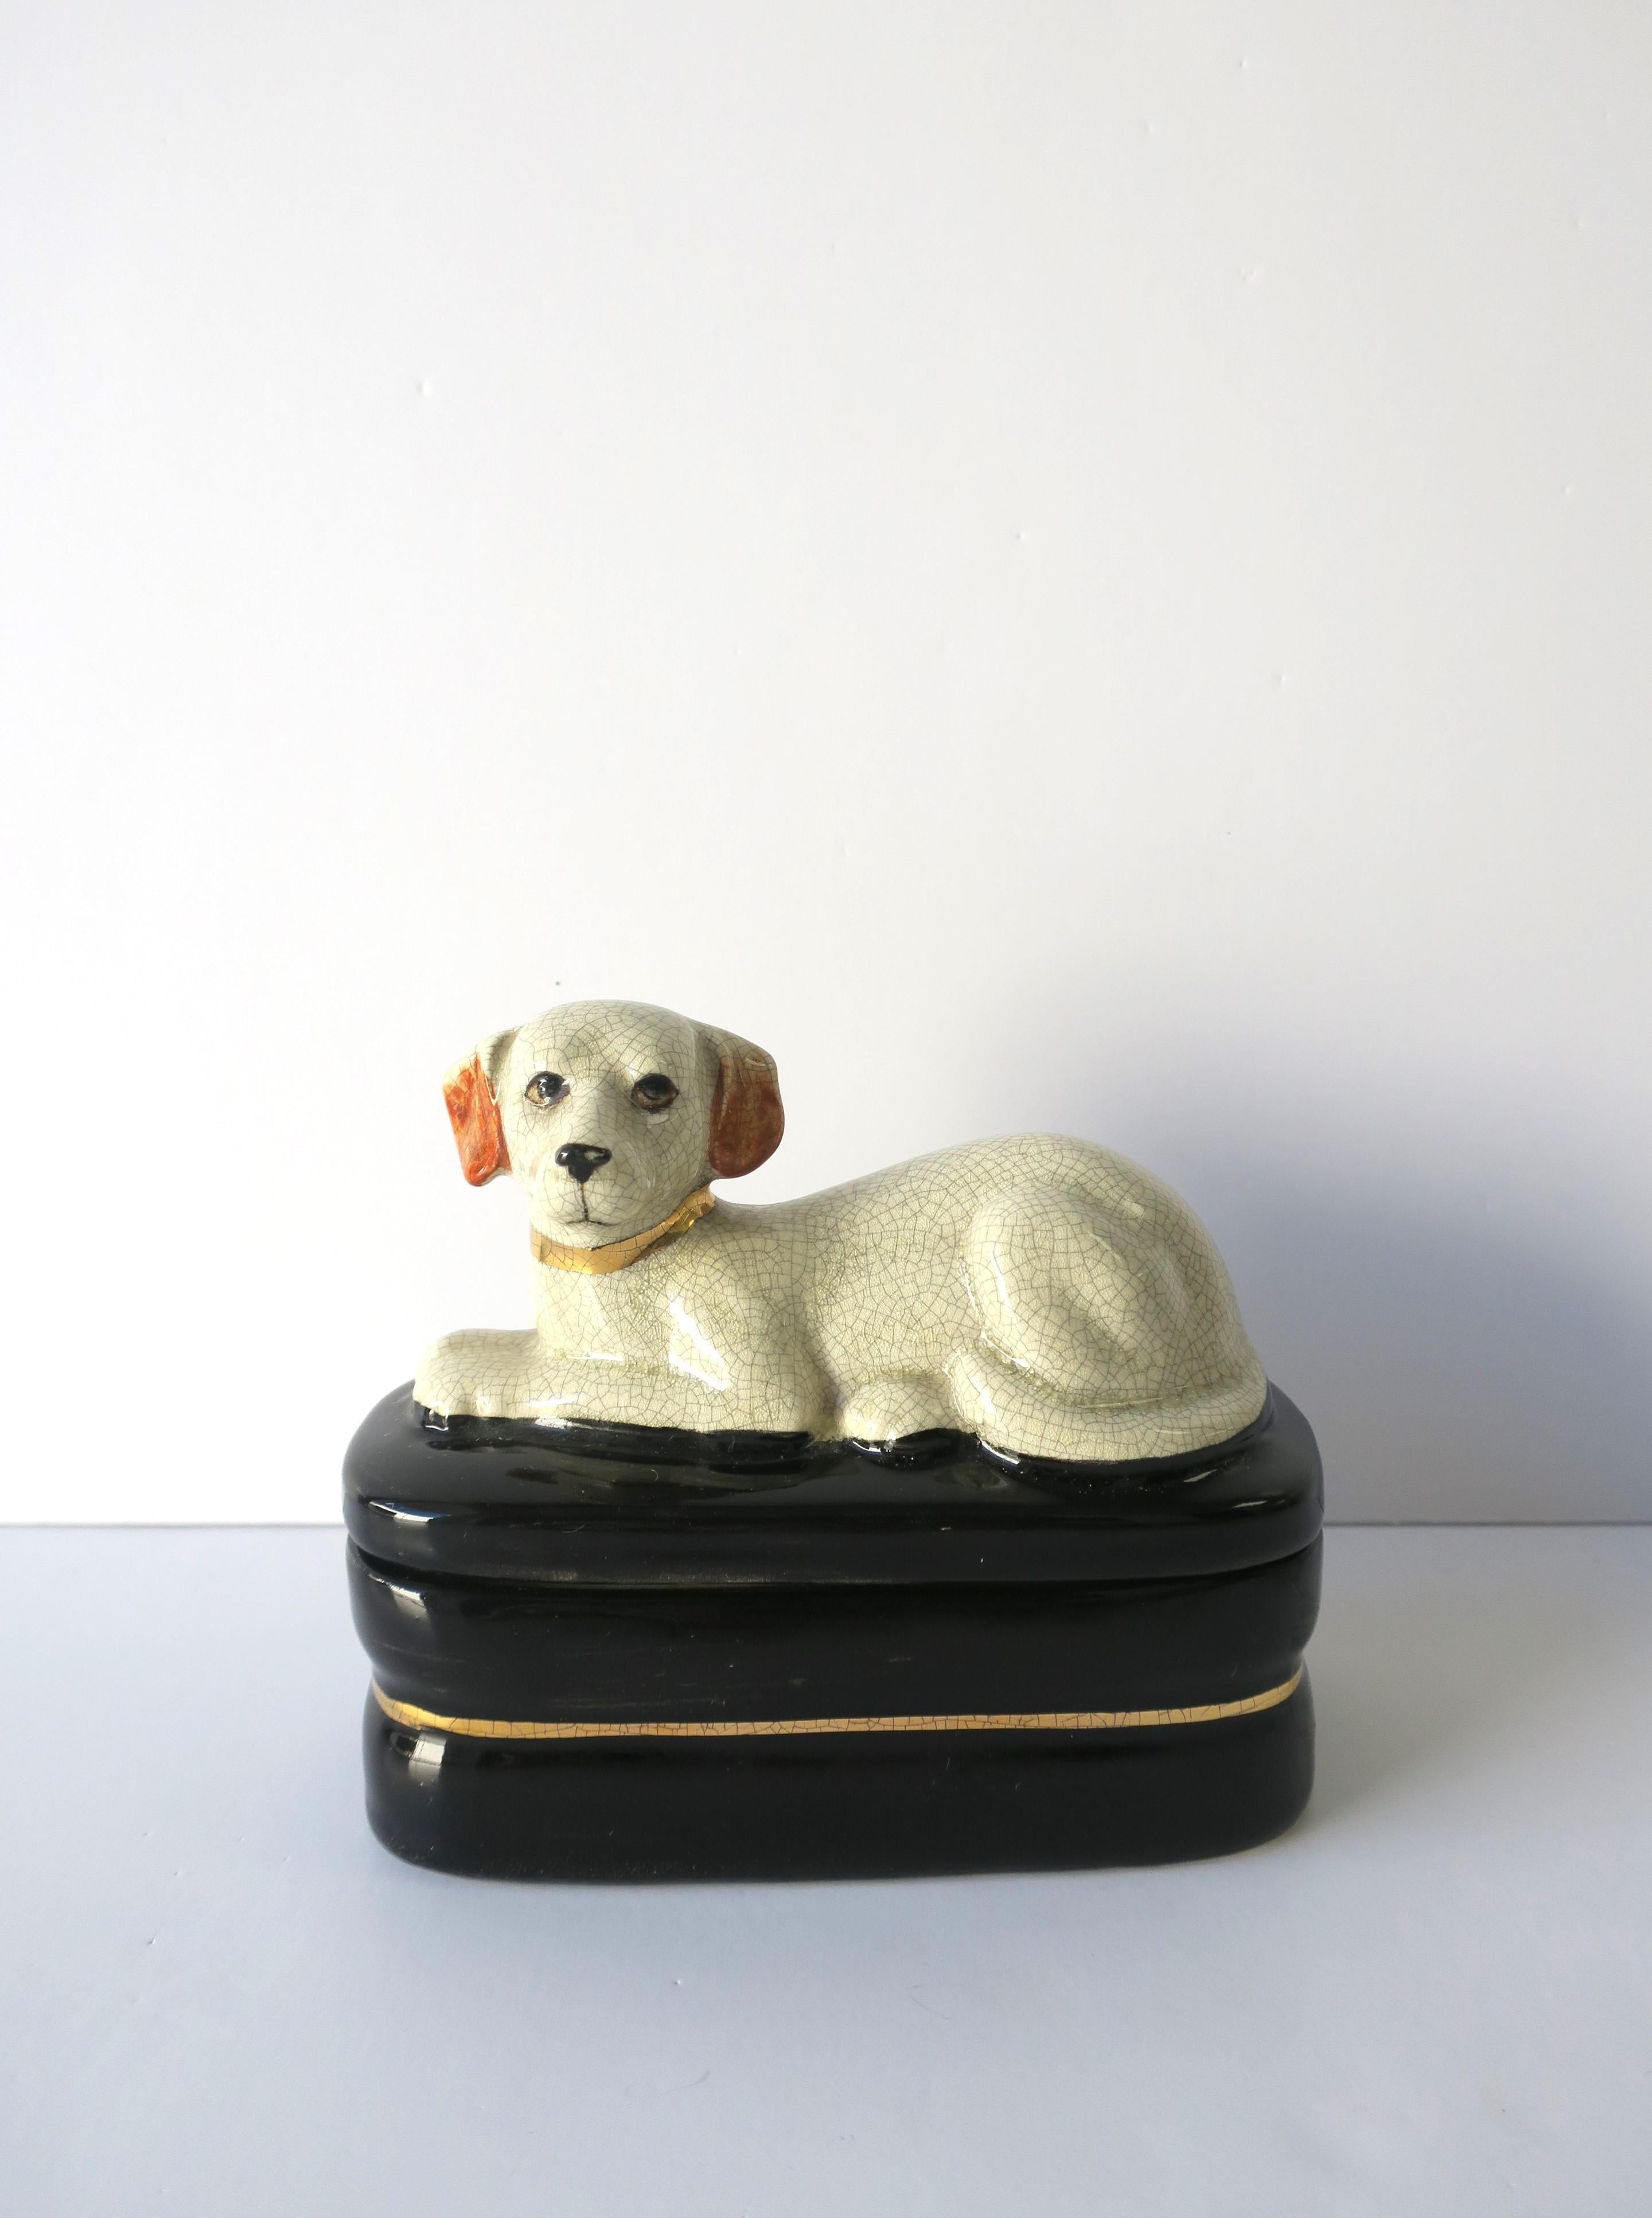 A ceramic Labrador Retriever dog on pillow decorative box, circa mid-20th century. Great as a standalone piece, or to hold small items on desk or jewelry on a vanity, dresser, etc. Colors include black and gold box base, gold collar around dogs'